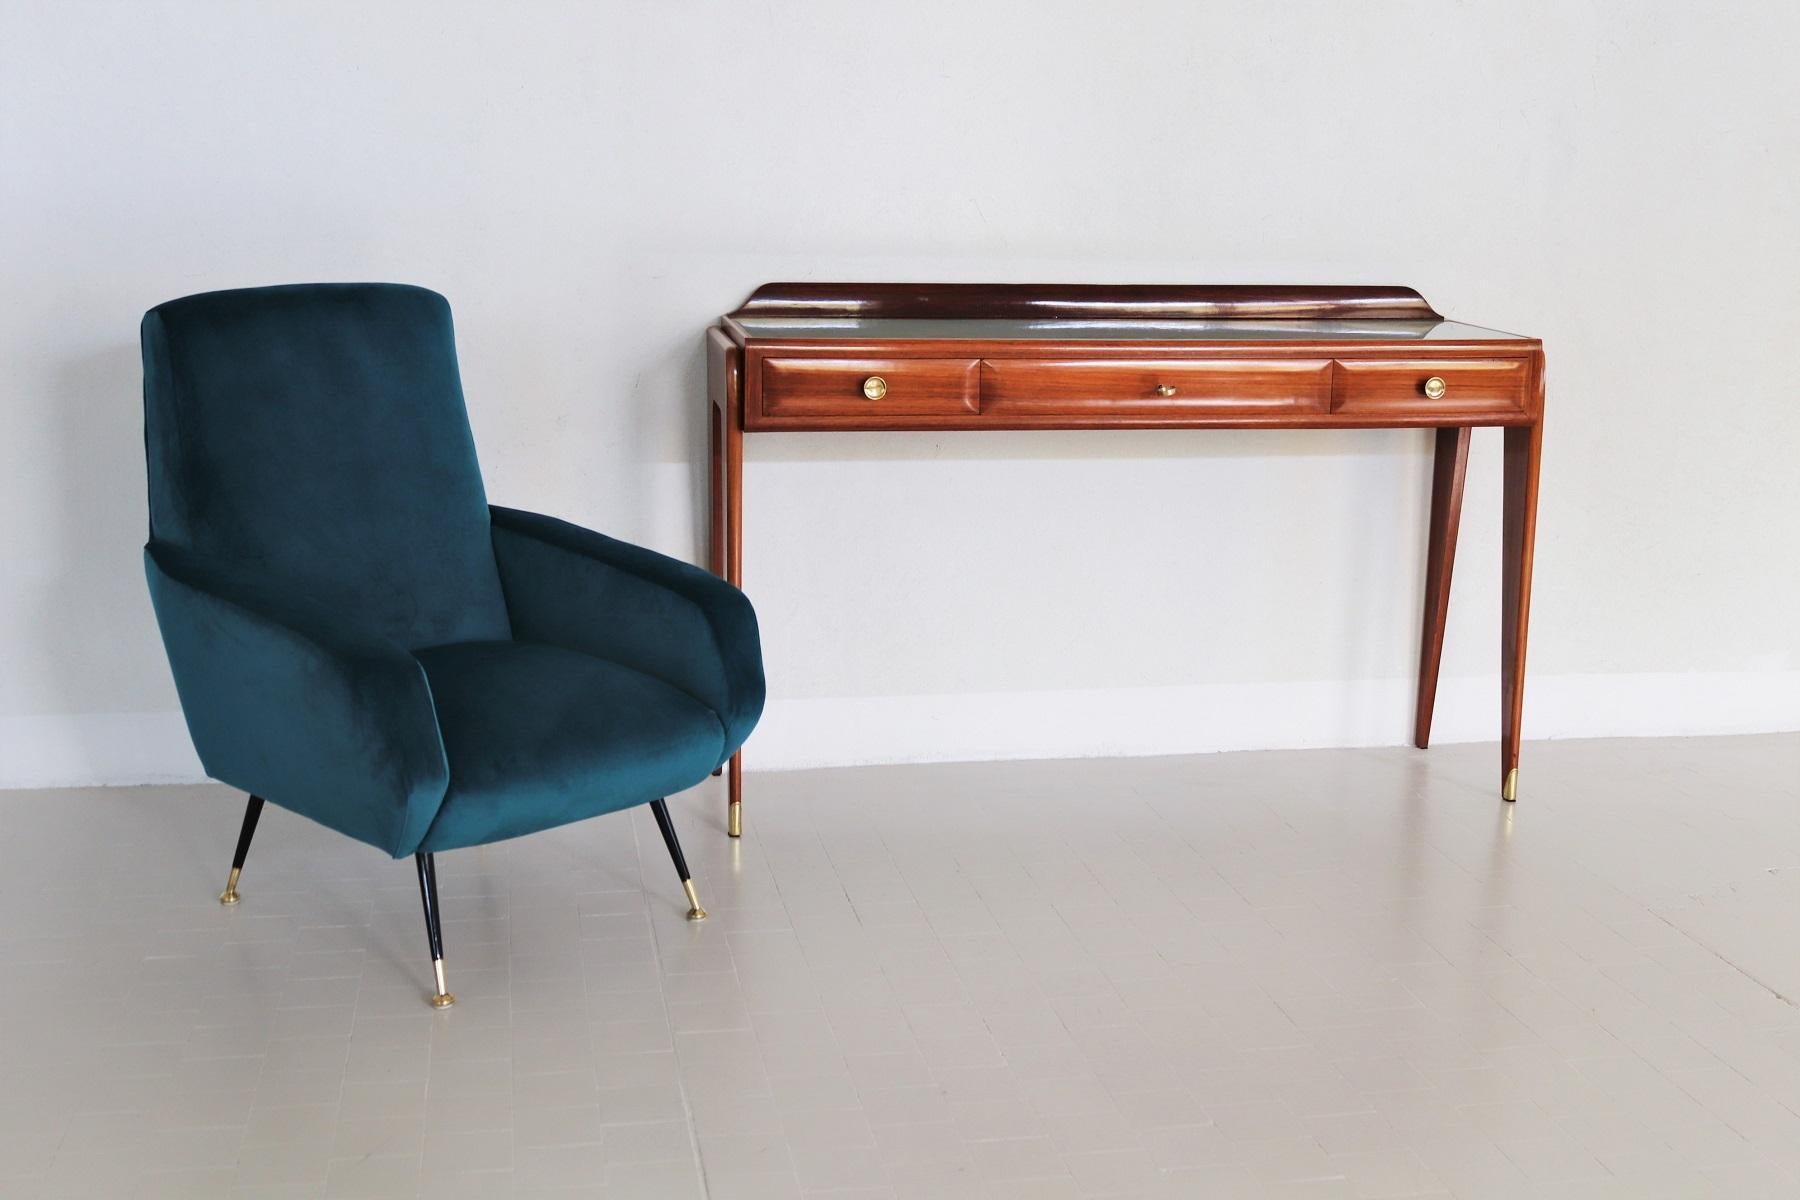 Mid-Century Modern Italian Midcentury Console Table or Credenza in Mahogany by Mobili Cantu, 1950s